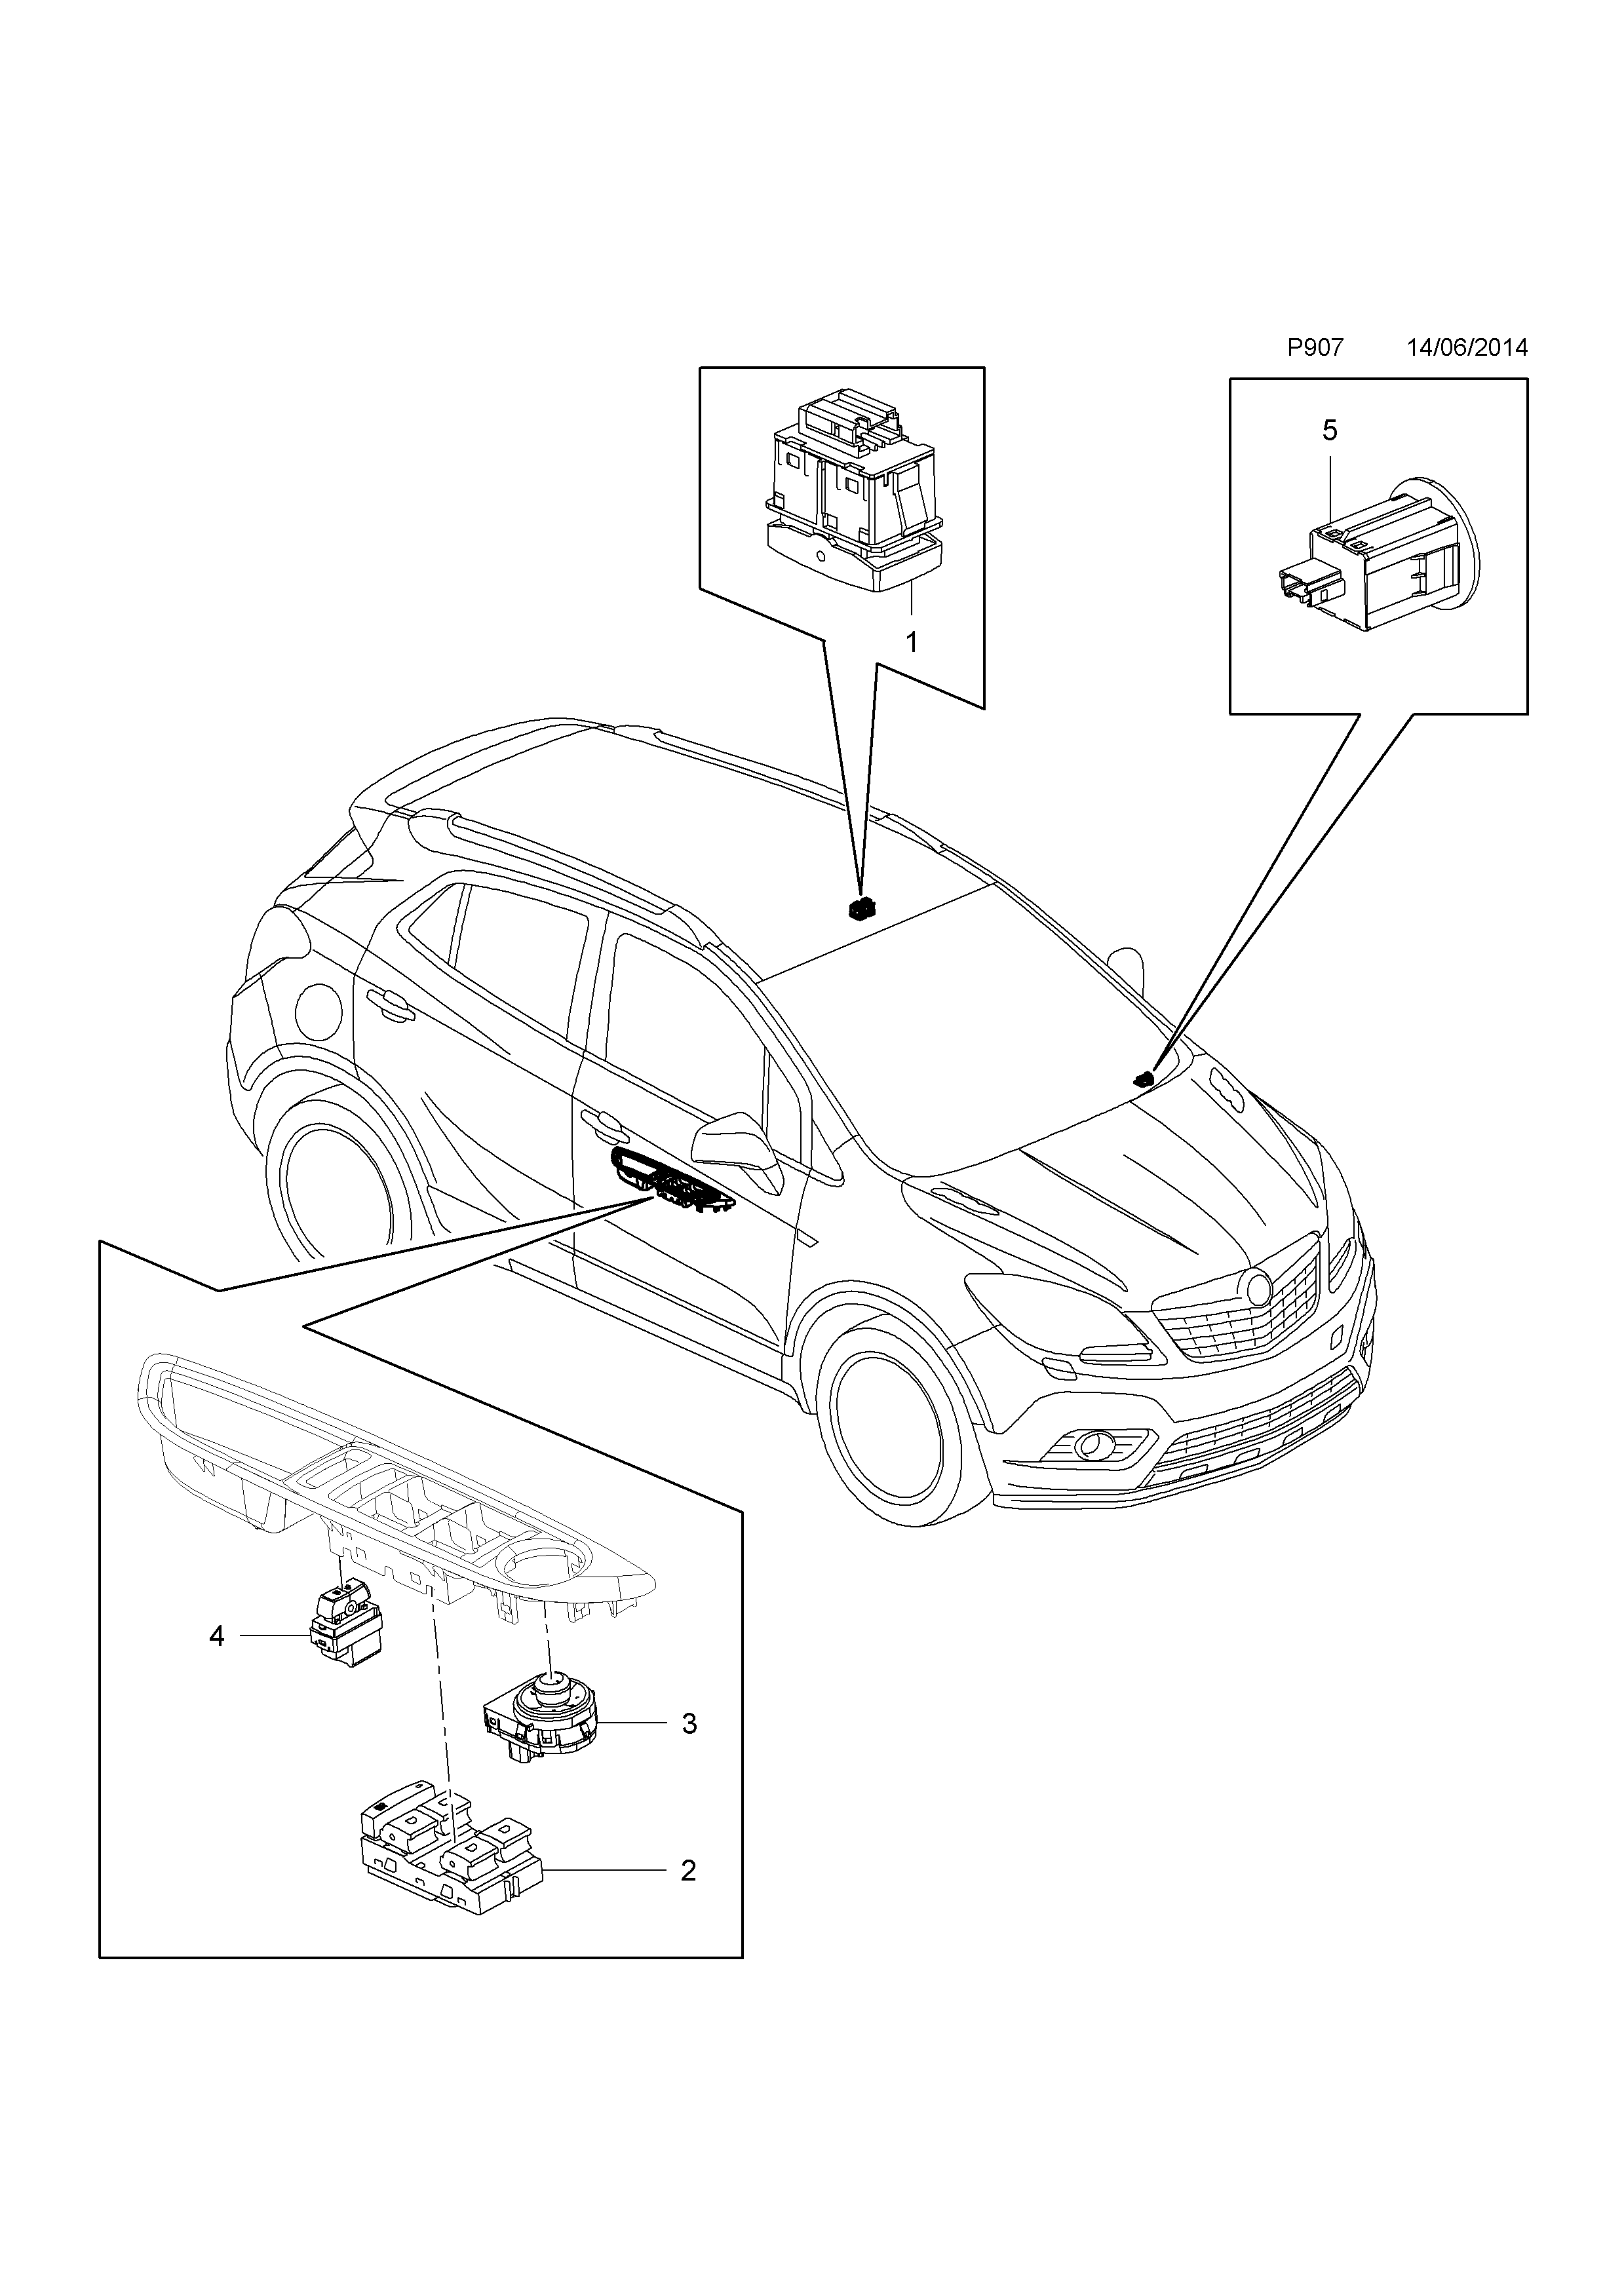 INTERIOR SWITCHES <small><i>[PASSENGER AIRBAG DISABLE SWITCH]</i></small>